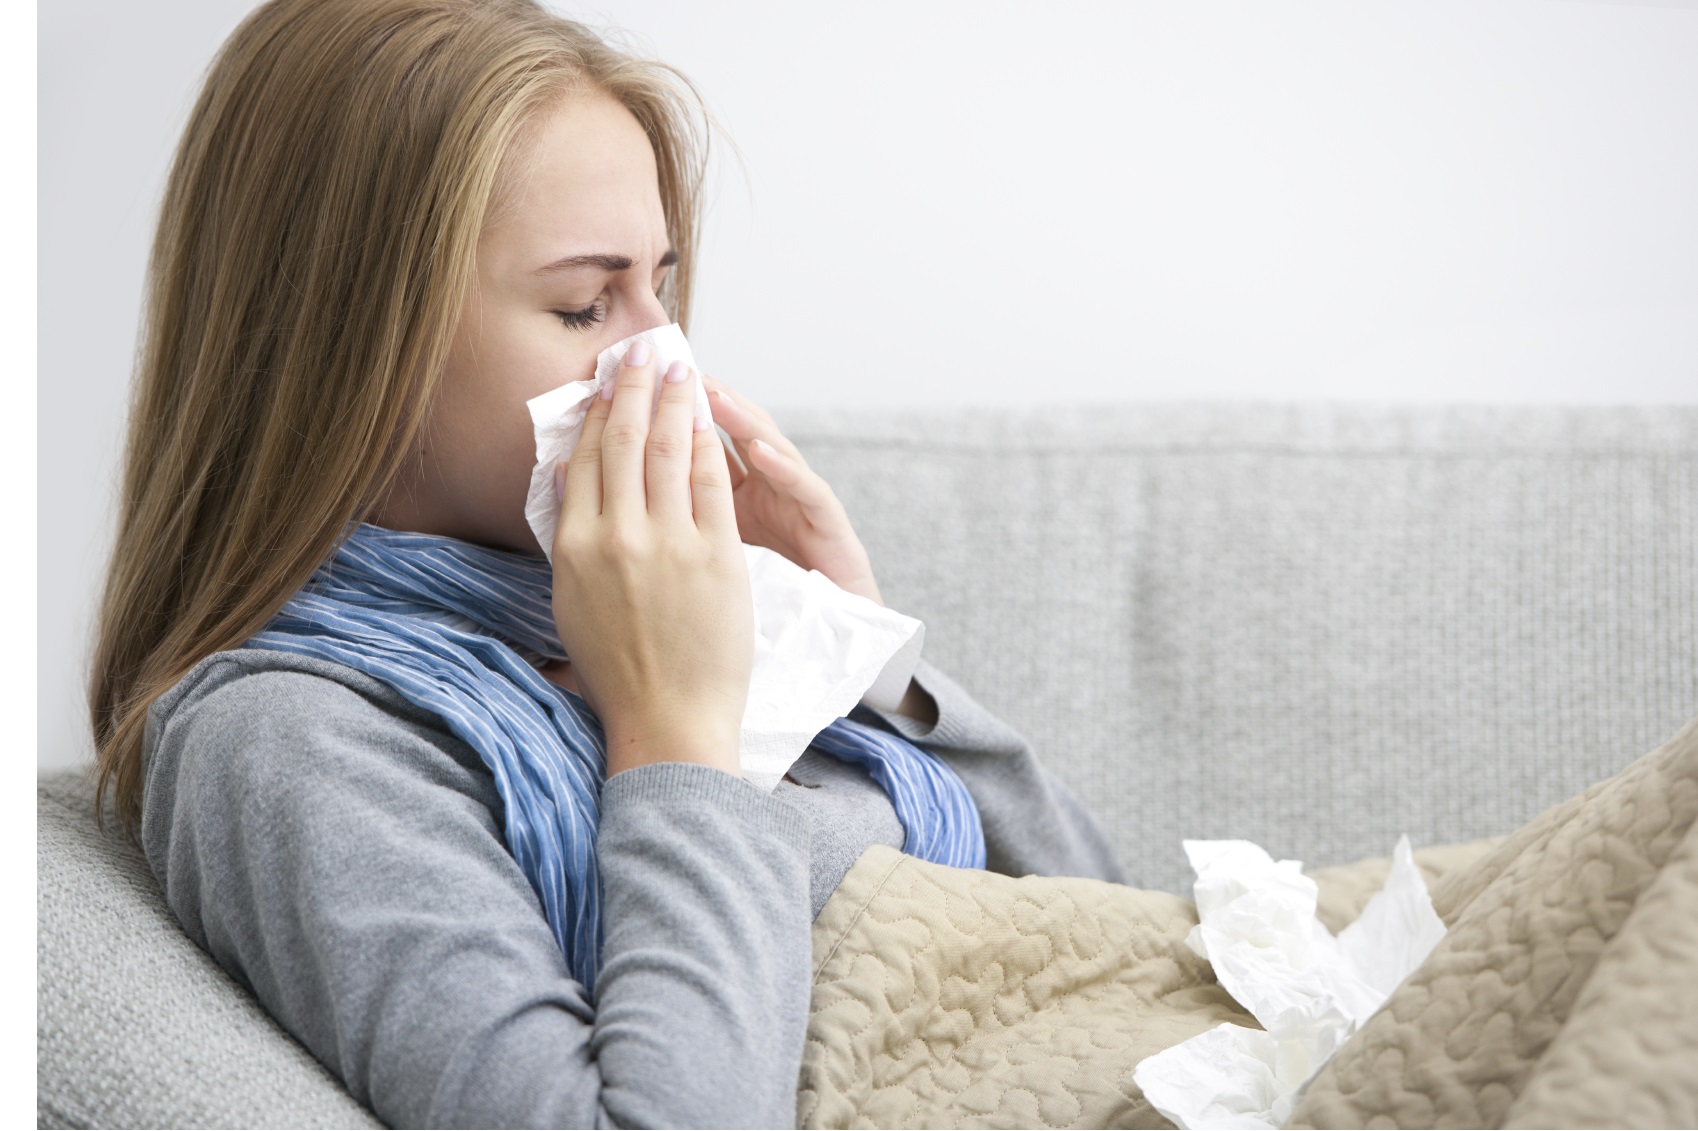 Image of woman ill with the flu, blowing her nose.